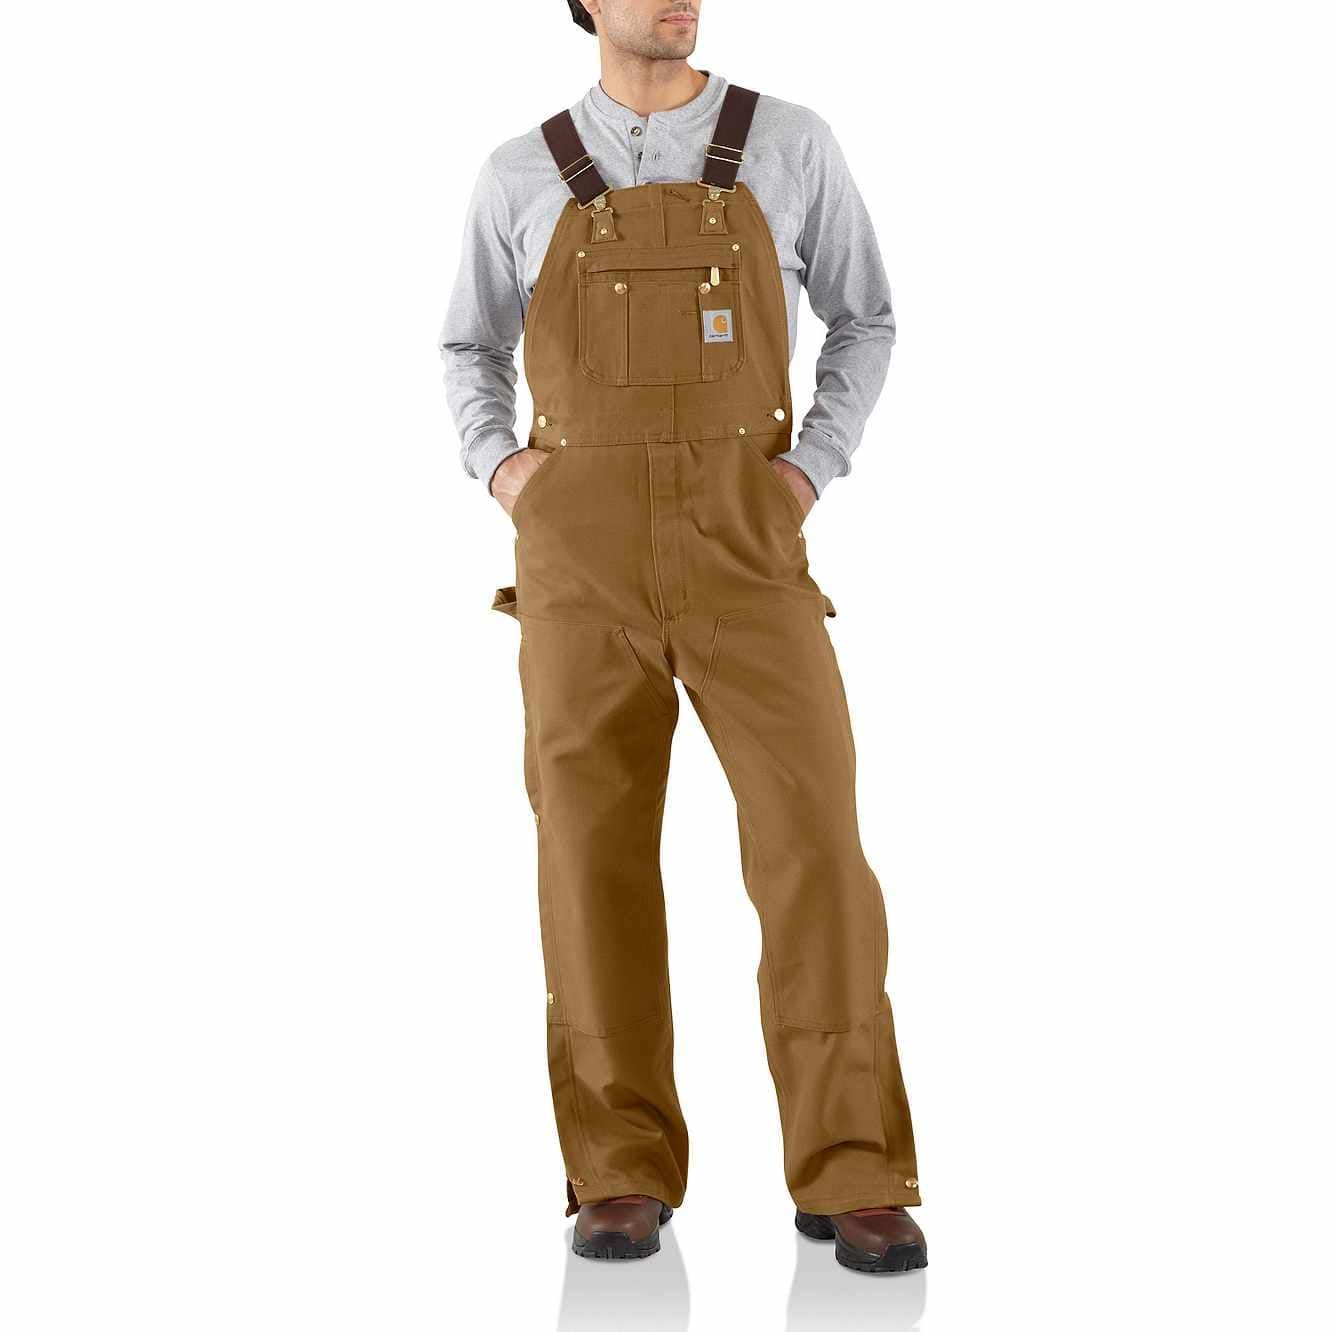 Need Longer Overalls Straps. : Discover 10 Savvy Solutions for Bib Overalls and Straps